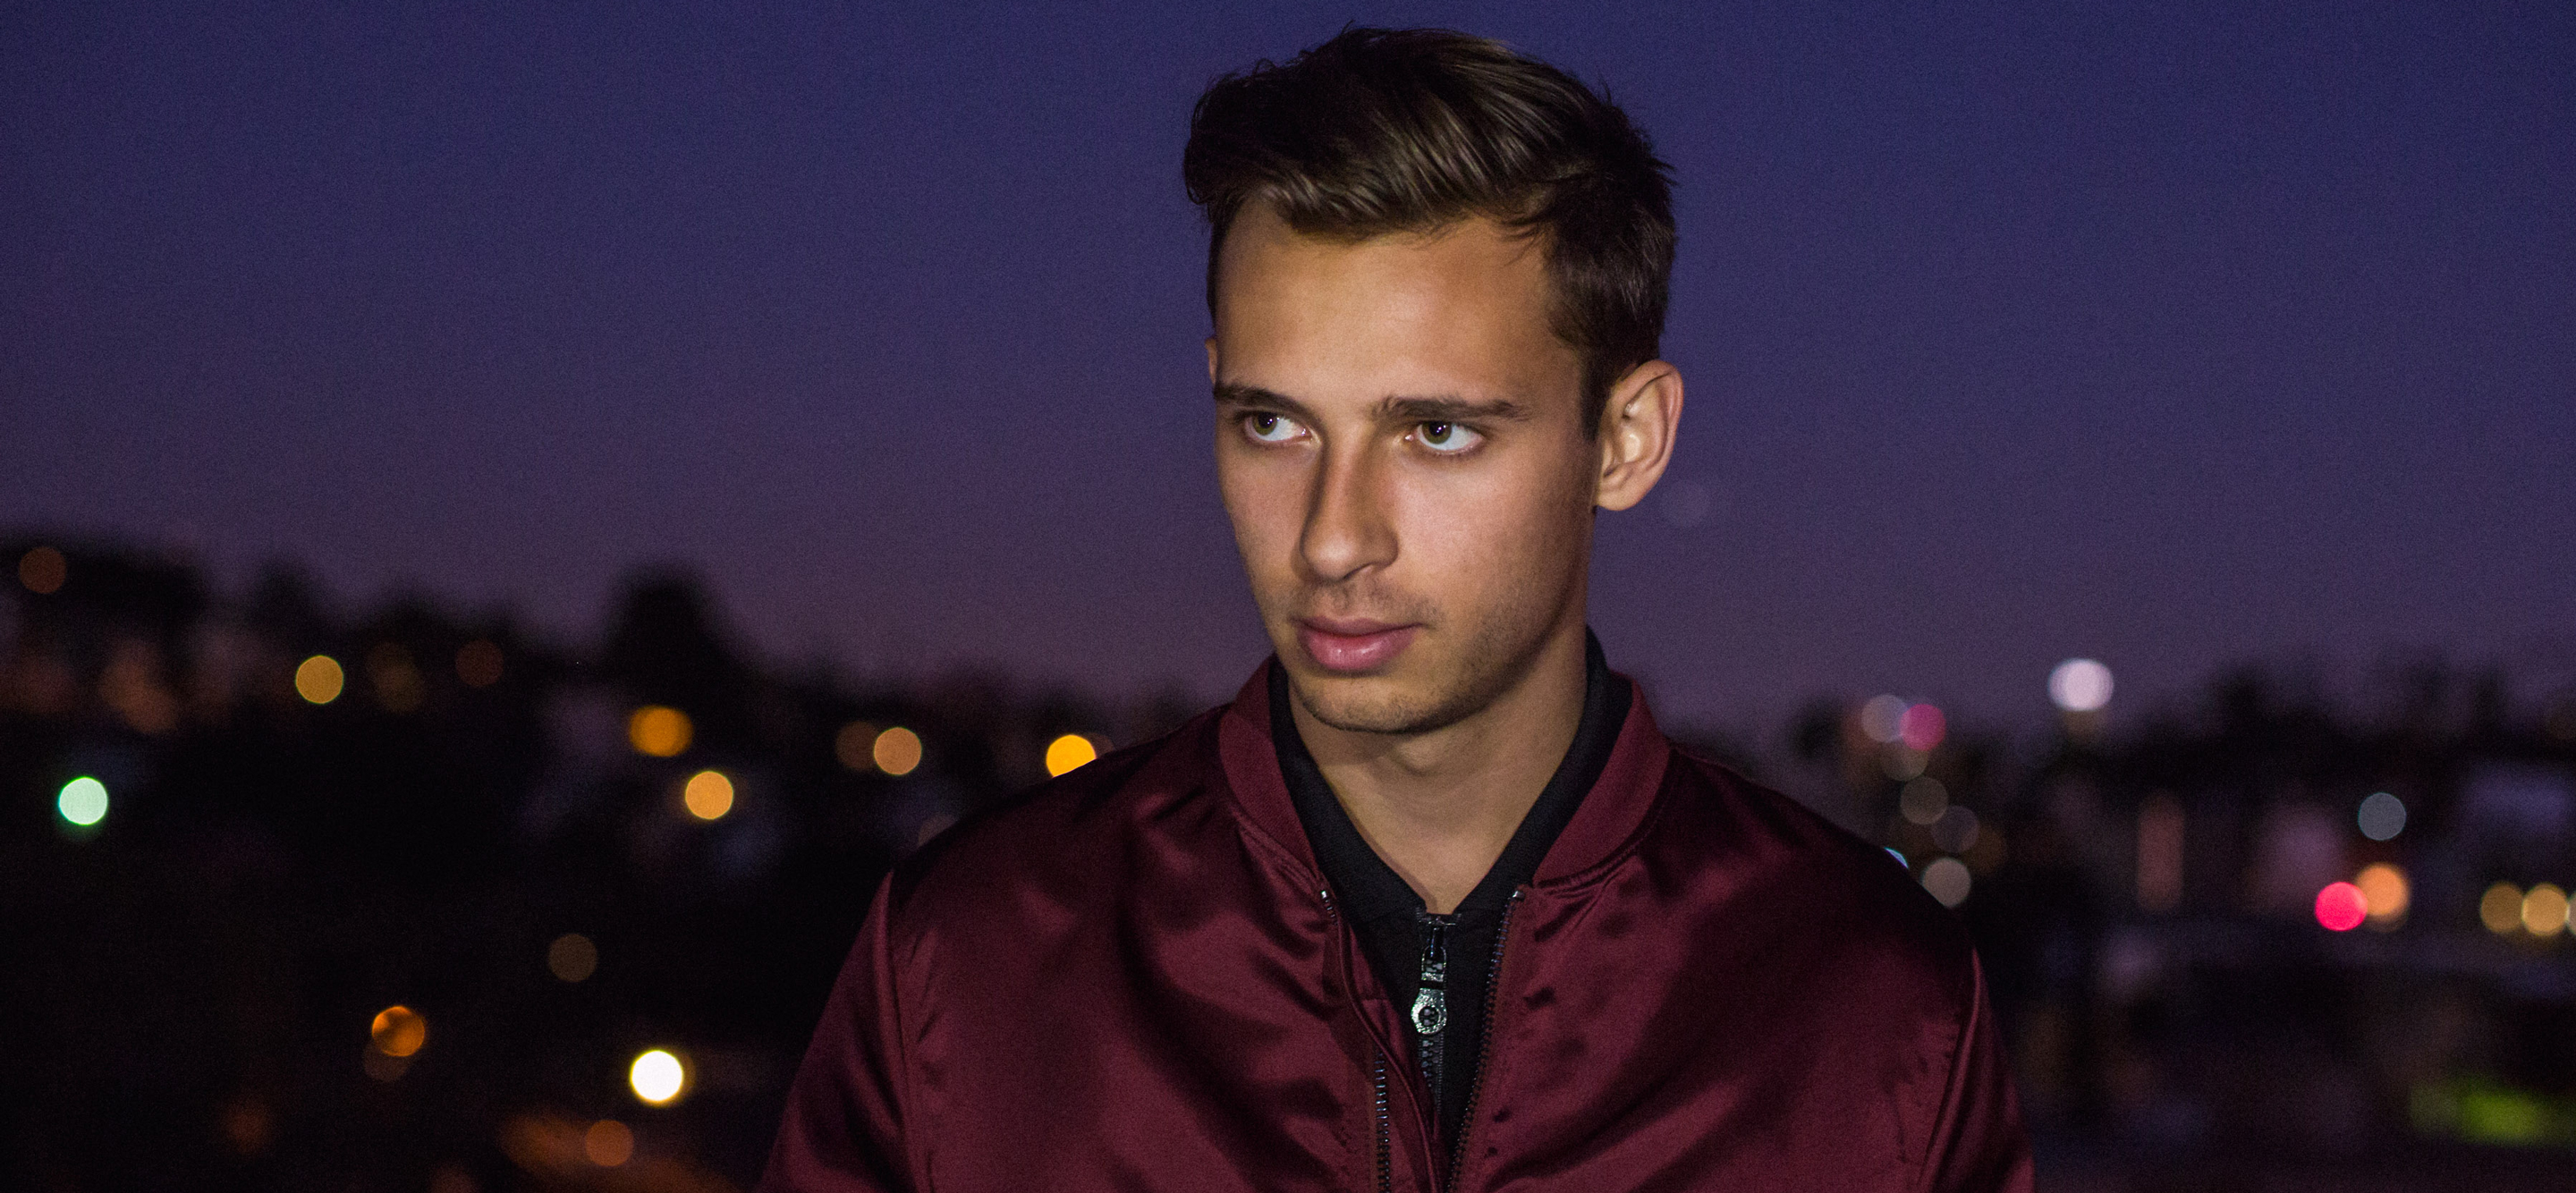 Sophie Kirov, on being Flume’s Tour Manager